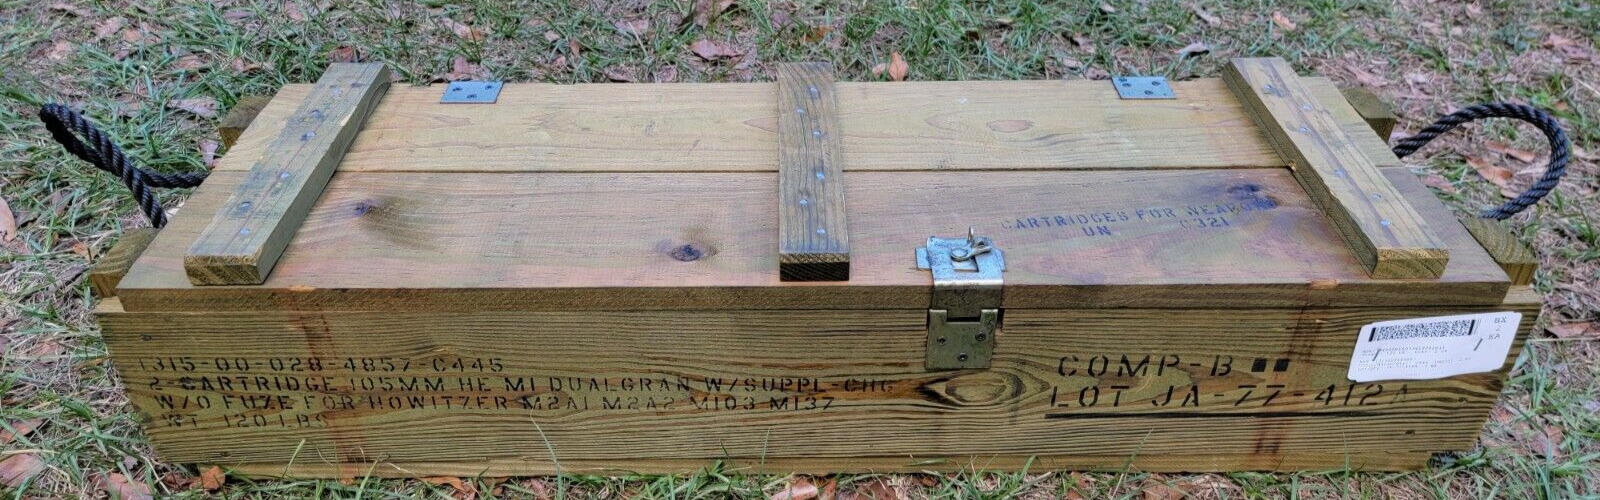 US Military 105mm Howitzer Wooden Ammo Crate